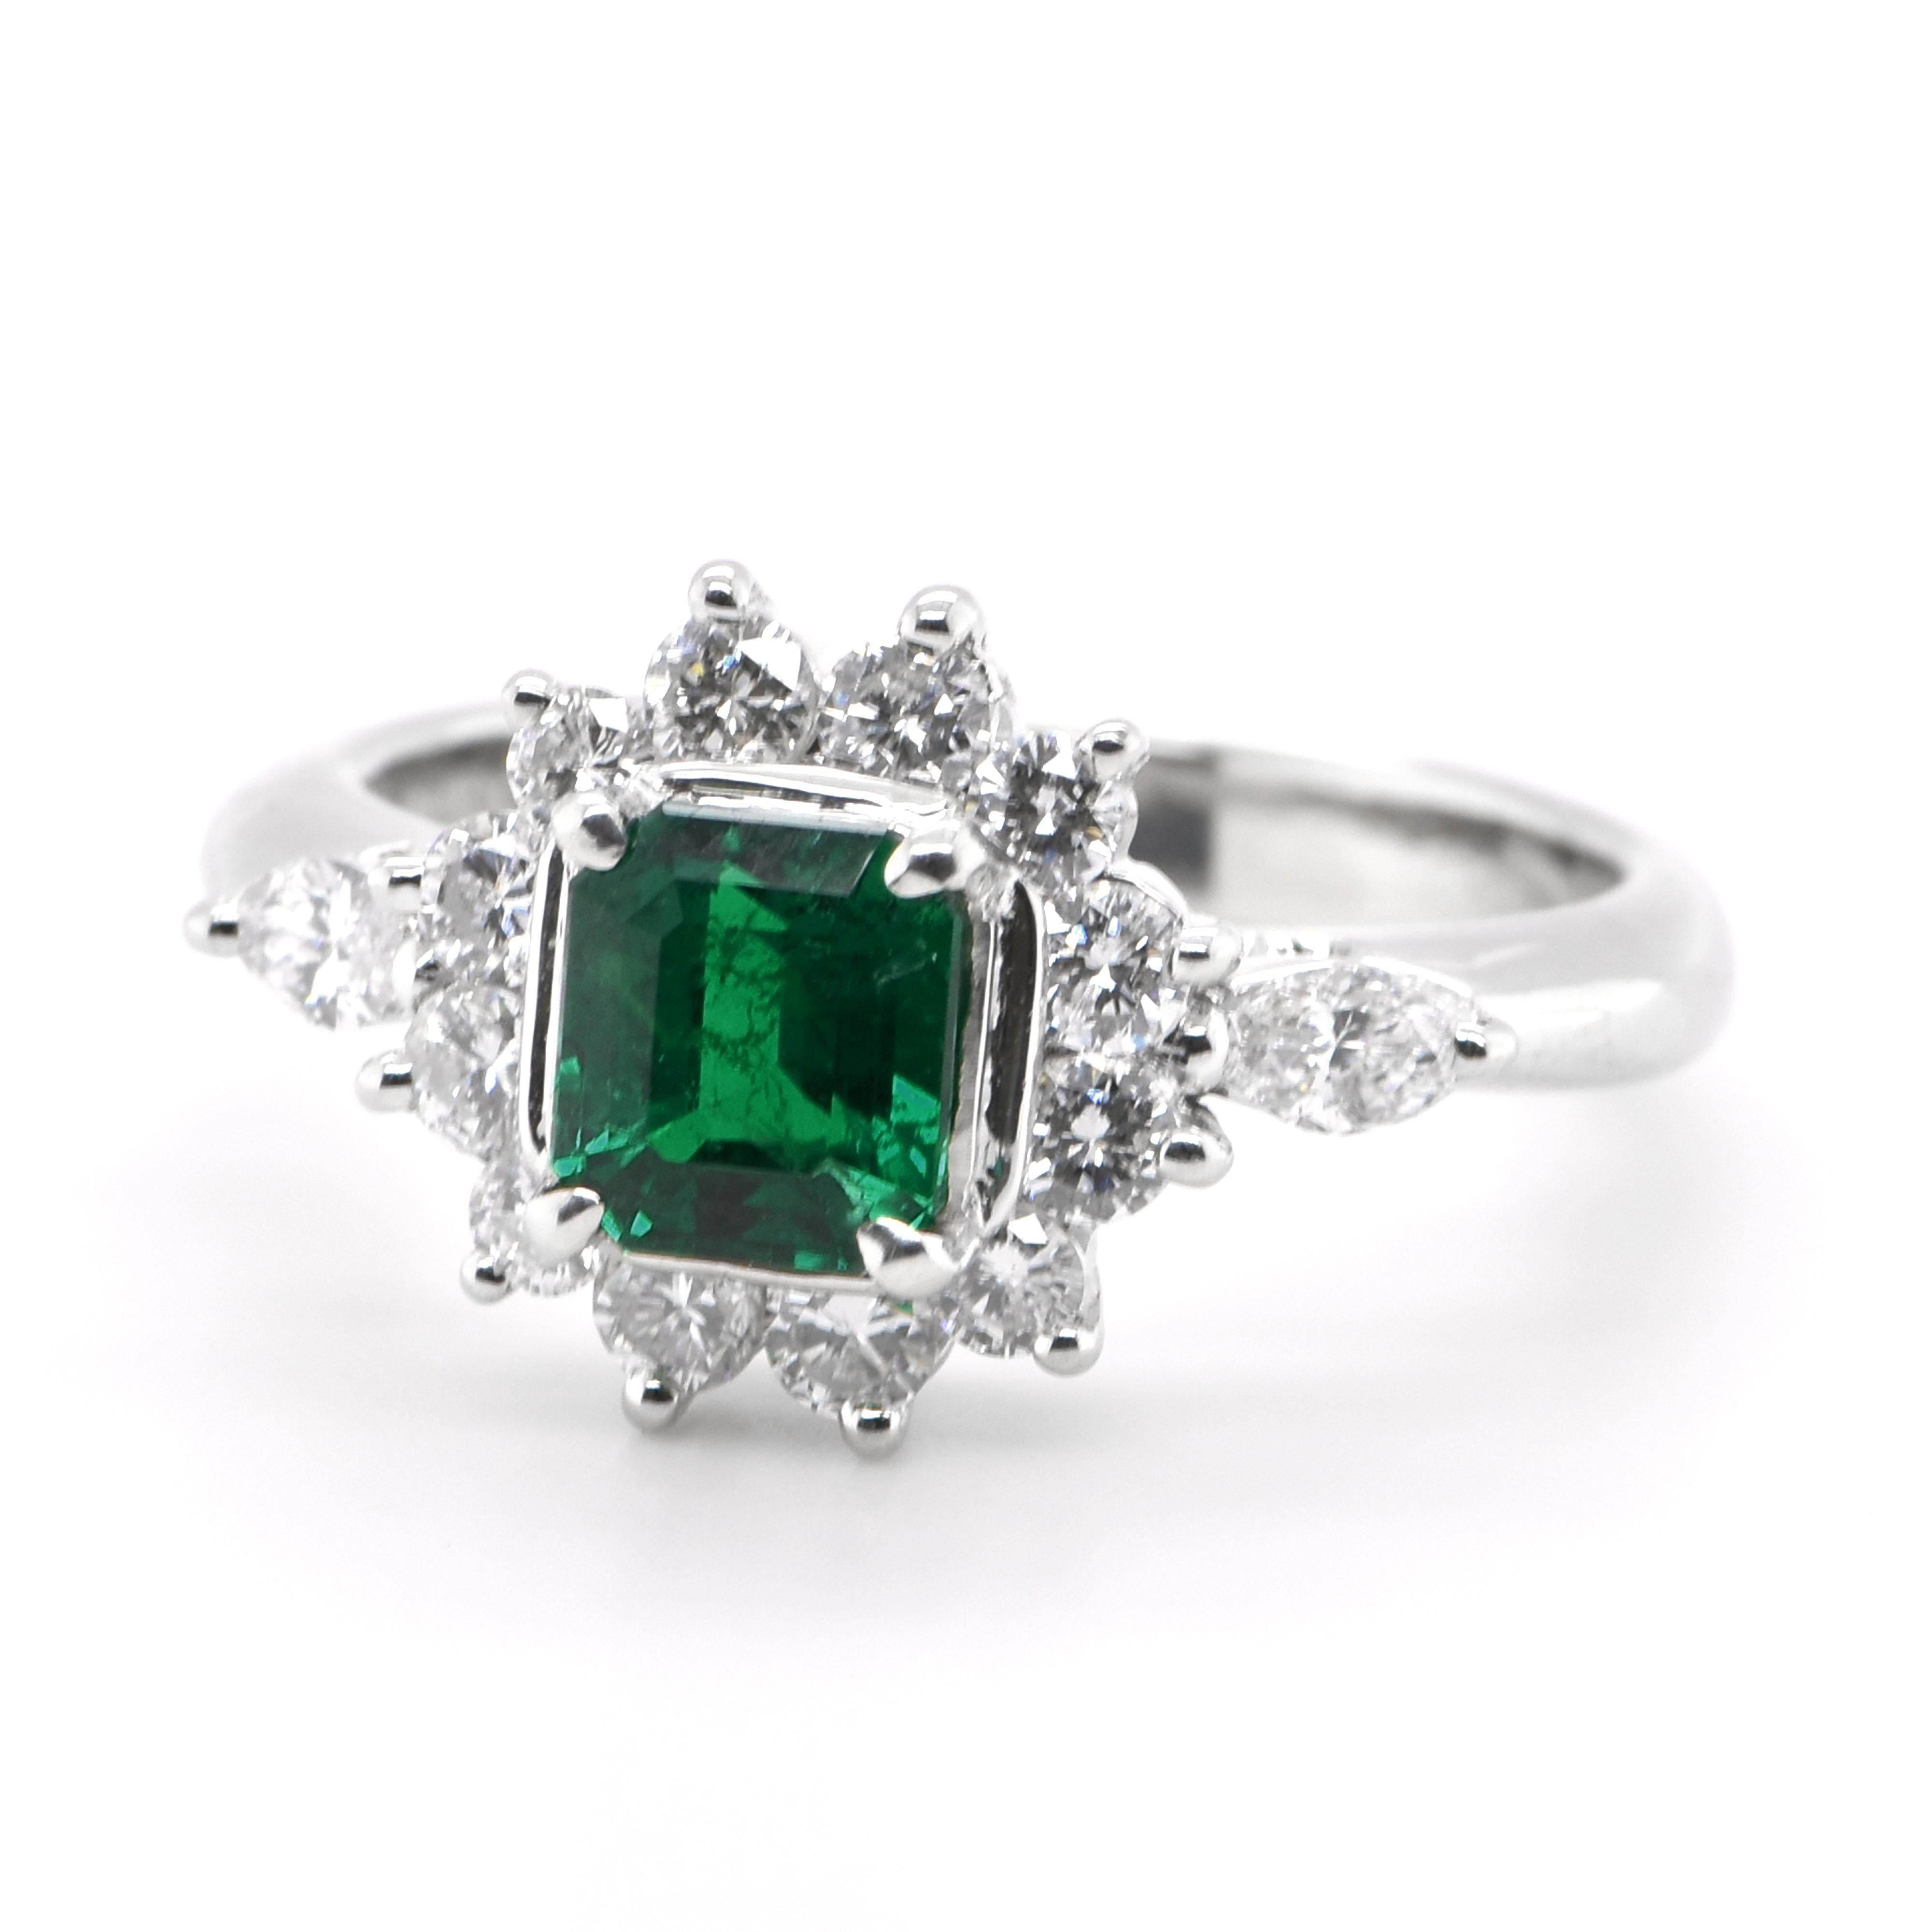 A stunning ring featuring a 0.67 Carat Natural Emerald and 0.48 Carats of Diamond Accents set in Platinum. People have admired emerald’s green for thousands of years. Emeralds have always been associated with the lushest landscapes and the richest